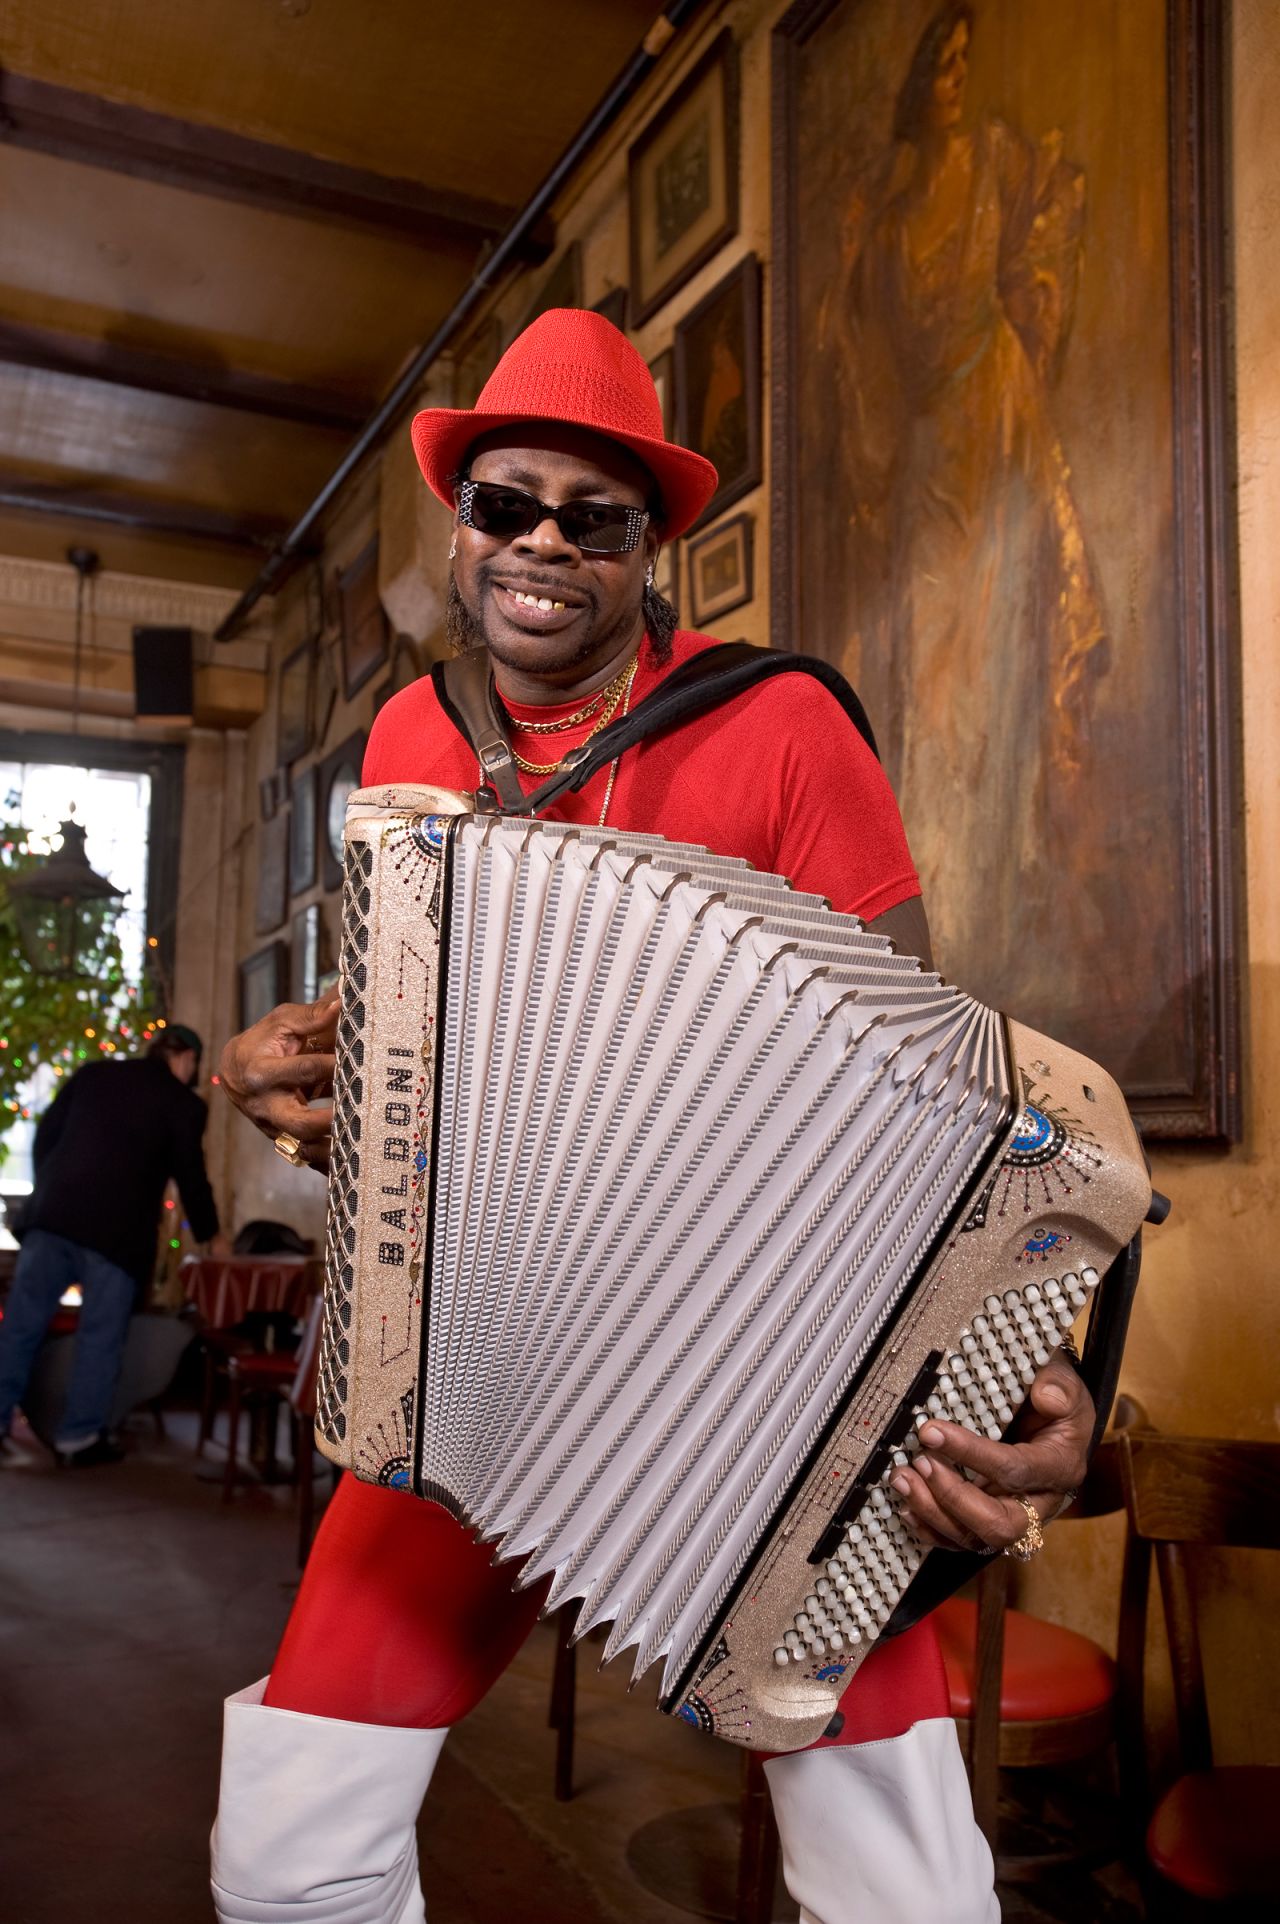 C.J. Chenier is the son of zydeco legend Clifton Chenier, who populated the Creole music genre in the 1950s. Chenier the junior carries the "King of Zydeco" torch. 